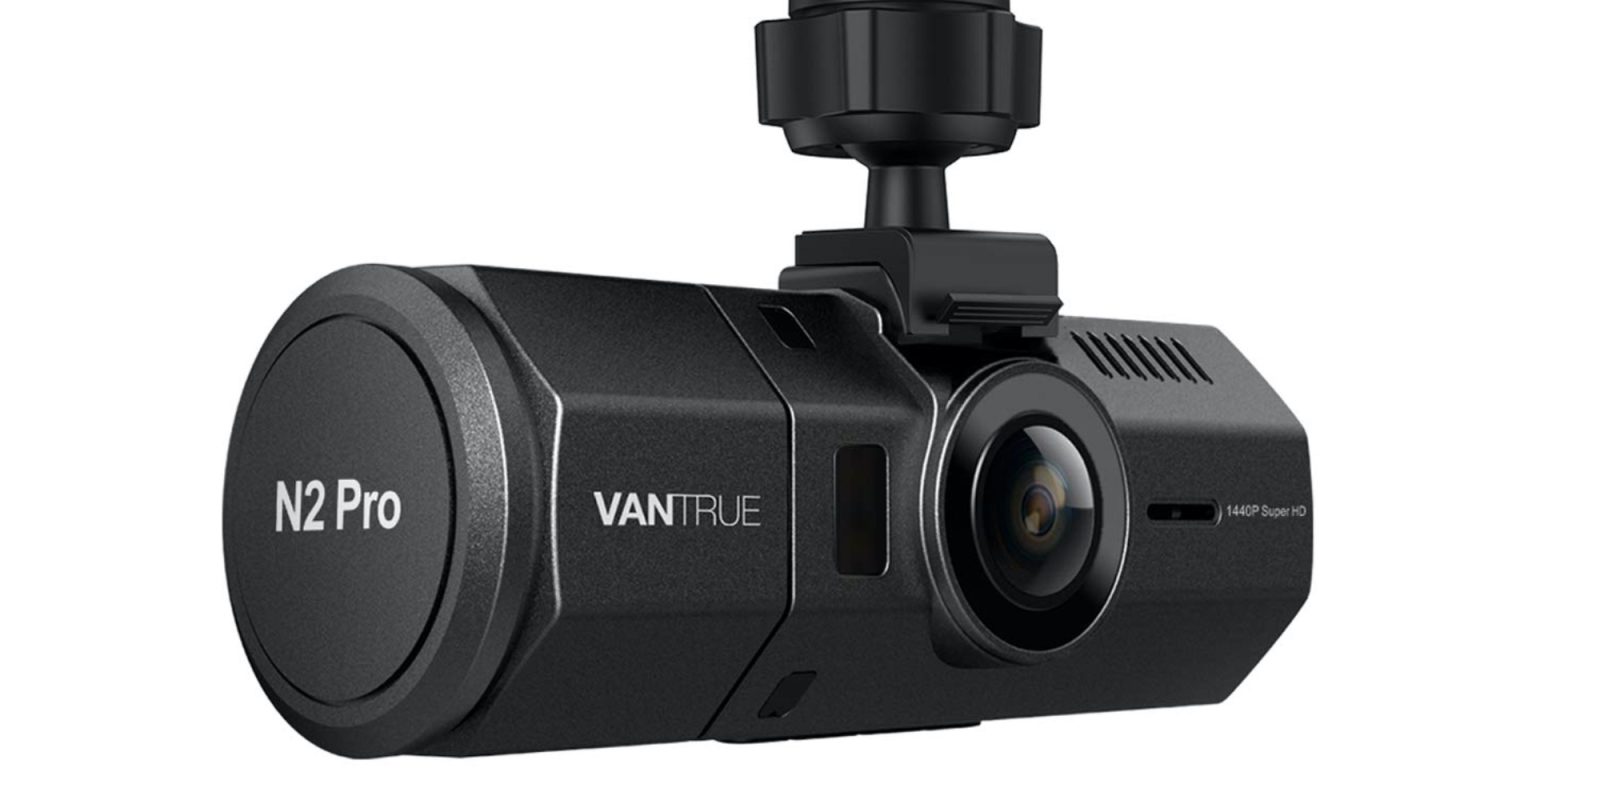 Save $70 on Vantrue's N2 Pro Uber Dual Dash Cam on sale for $130 at Amazon  - 9to5Toys